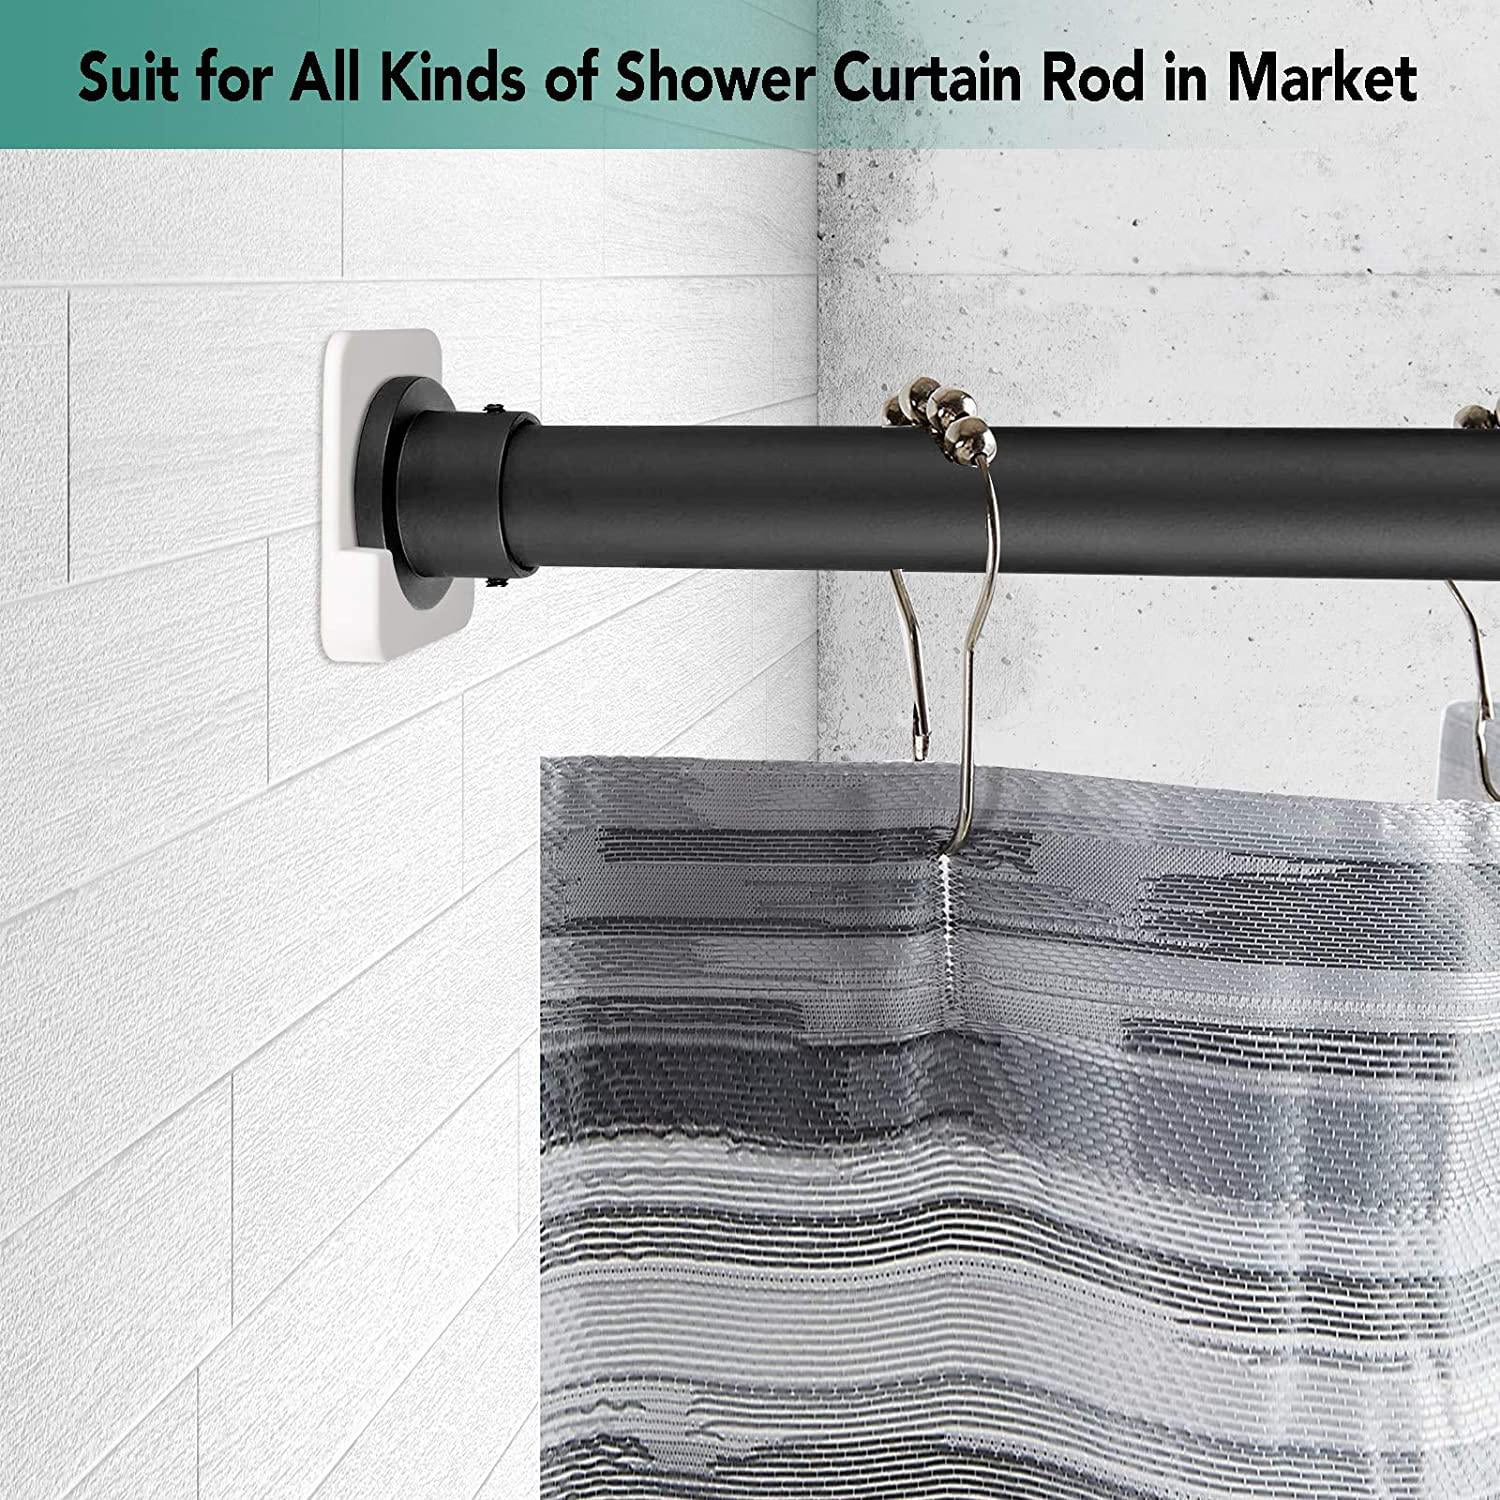 2PCS Shower Curtain Rod Holder Adhesive Shower Rod Wall Mount Tension Holder Rod Mount Retainer No Drilling Needed Persistent Viscous Suitable for Wall And Bathroom Curtain Rod Not Include